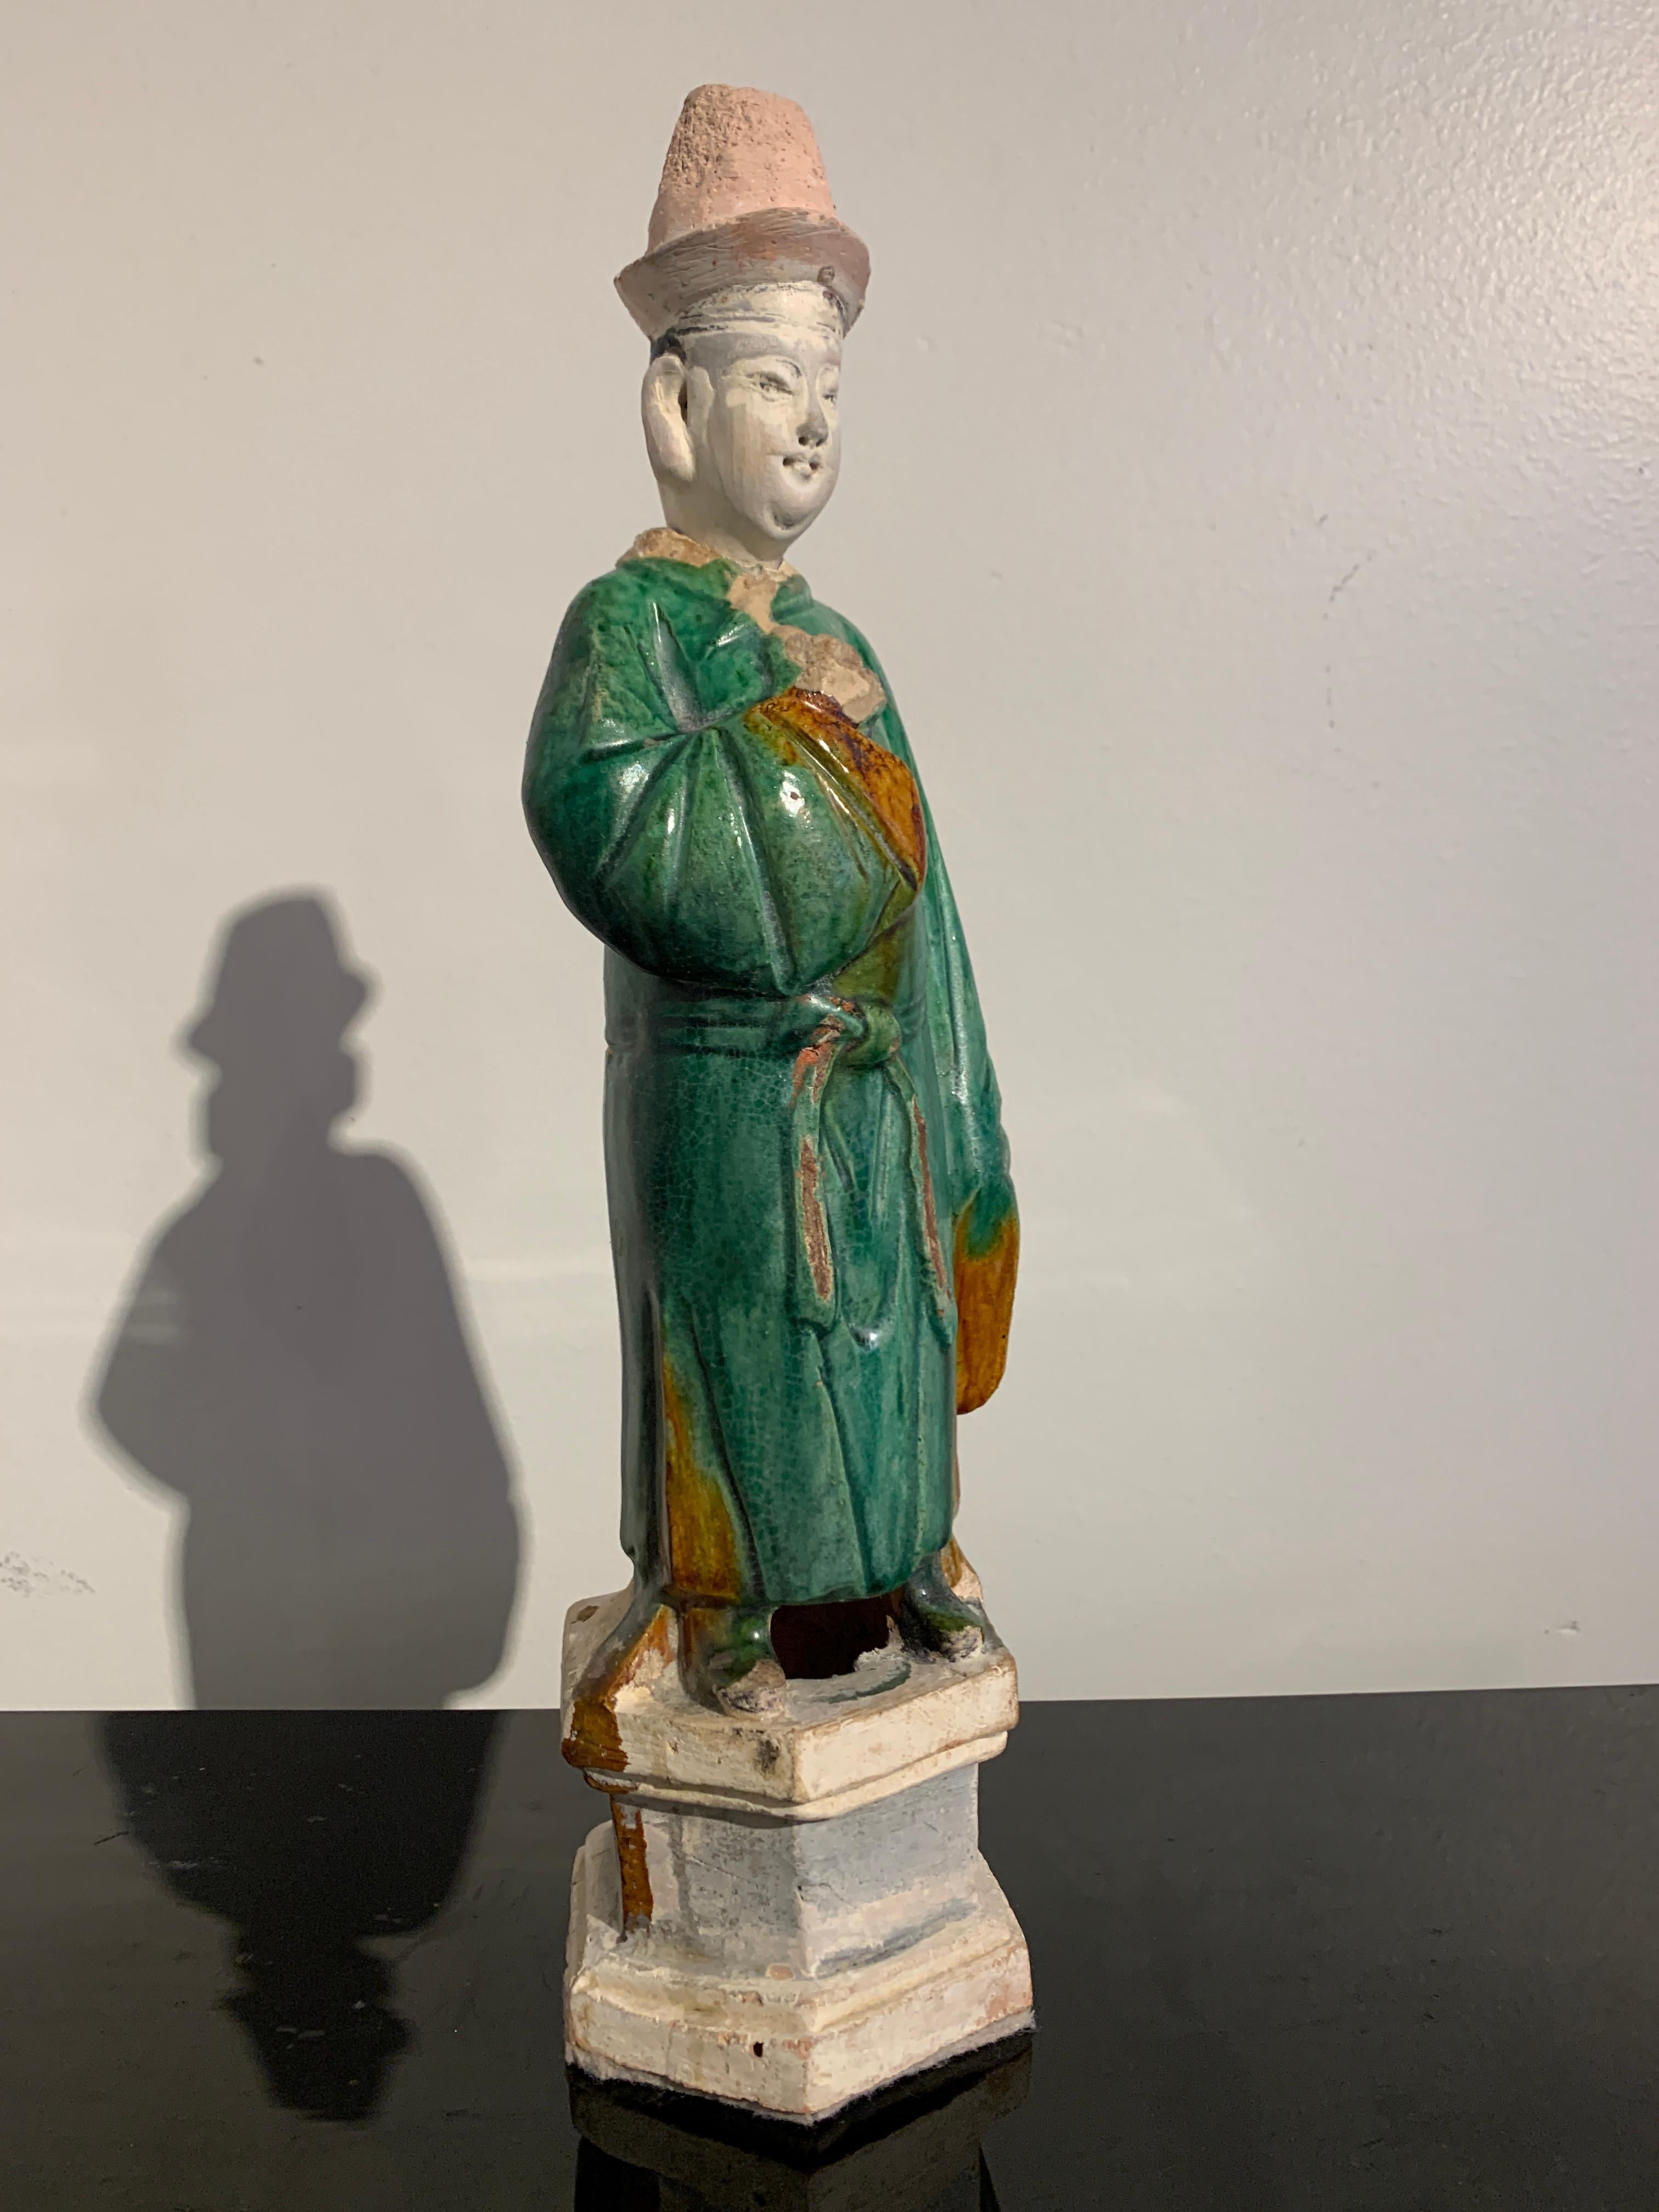 A nicely sized Chinese green and amber glazed pottery figure of a male attendant, Ming Dynasty, 16th-17th century, China.

The figure stands upon a tall integral hexagonal plinth, and is dressed in oversized green glazed robes with amber glazed